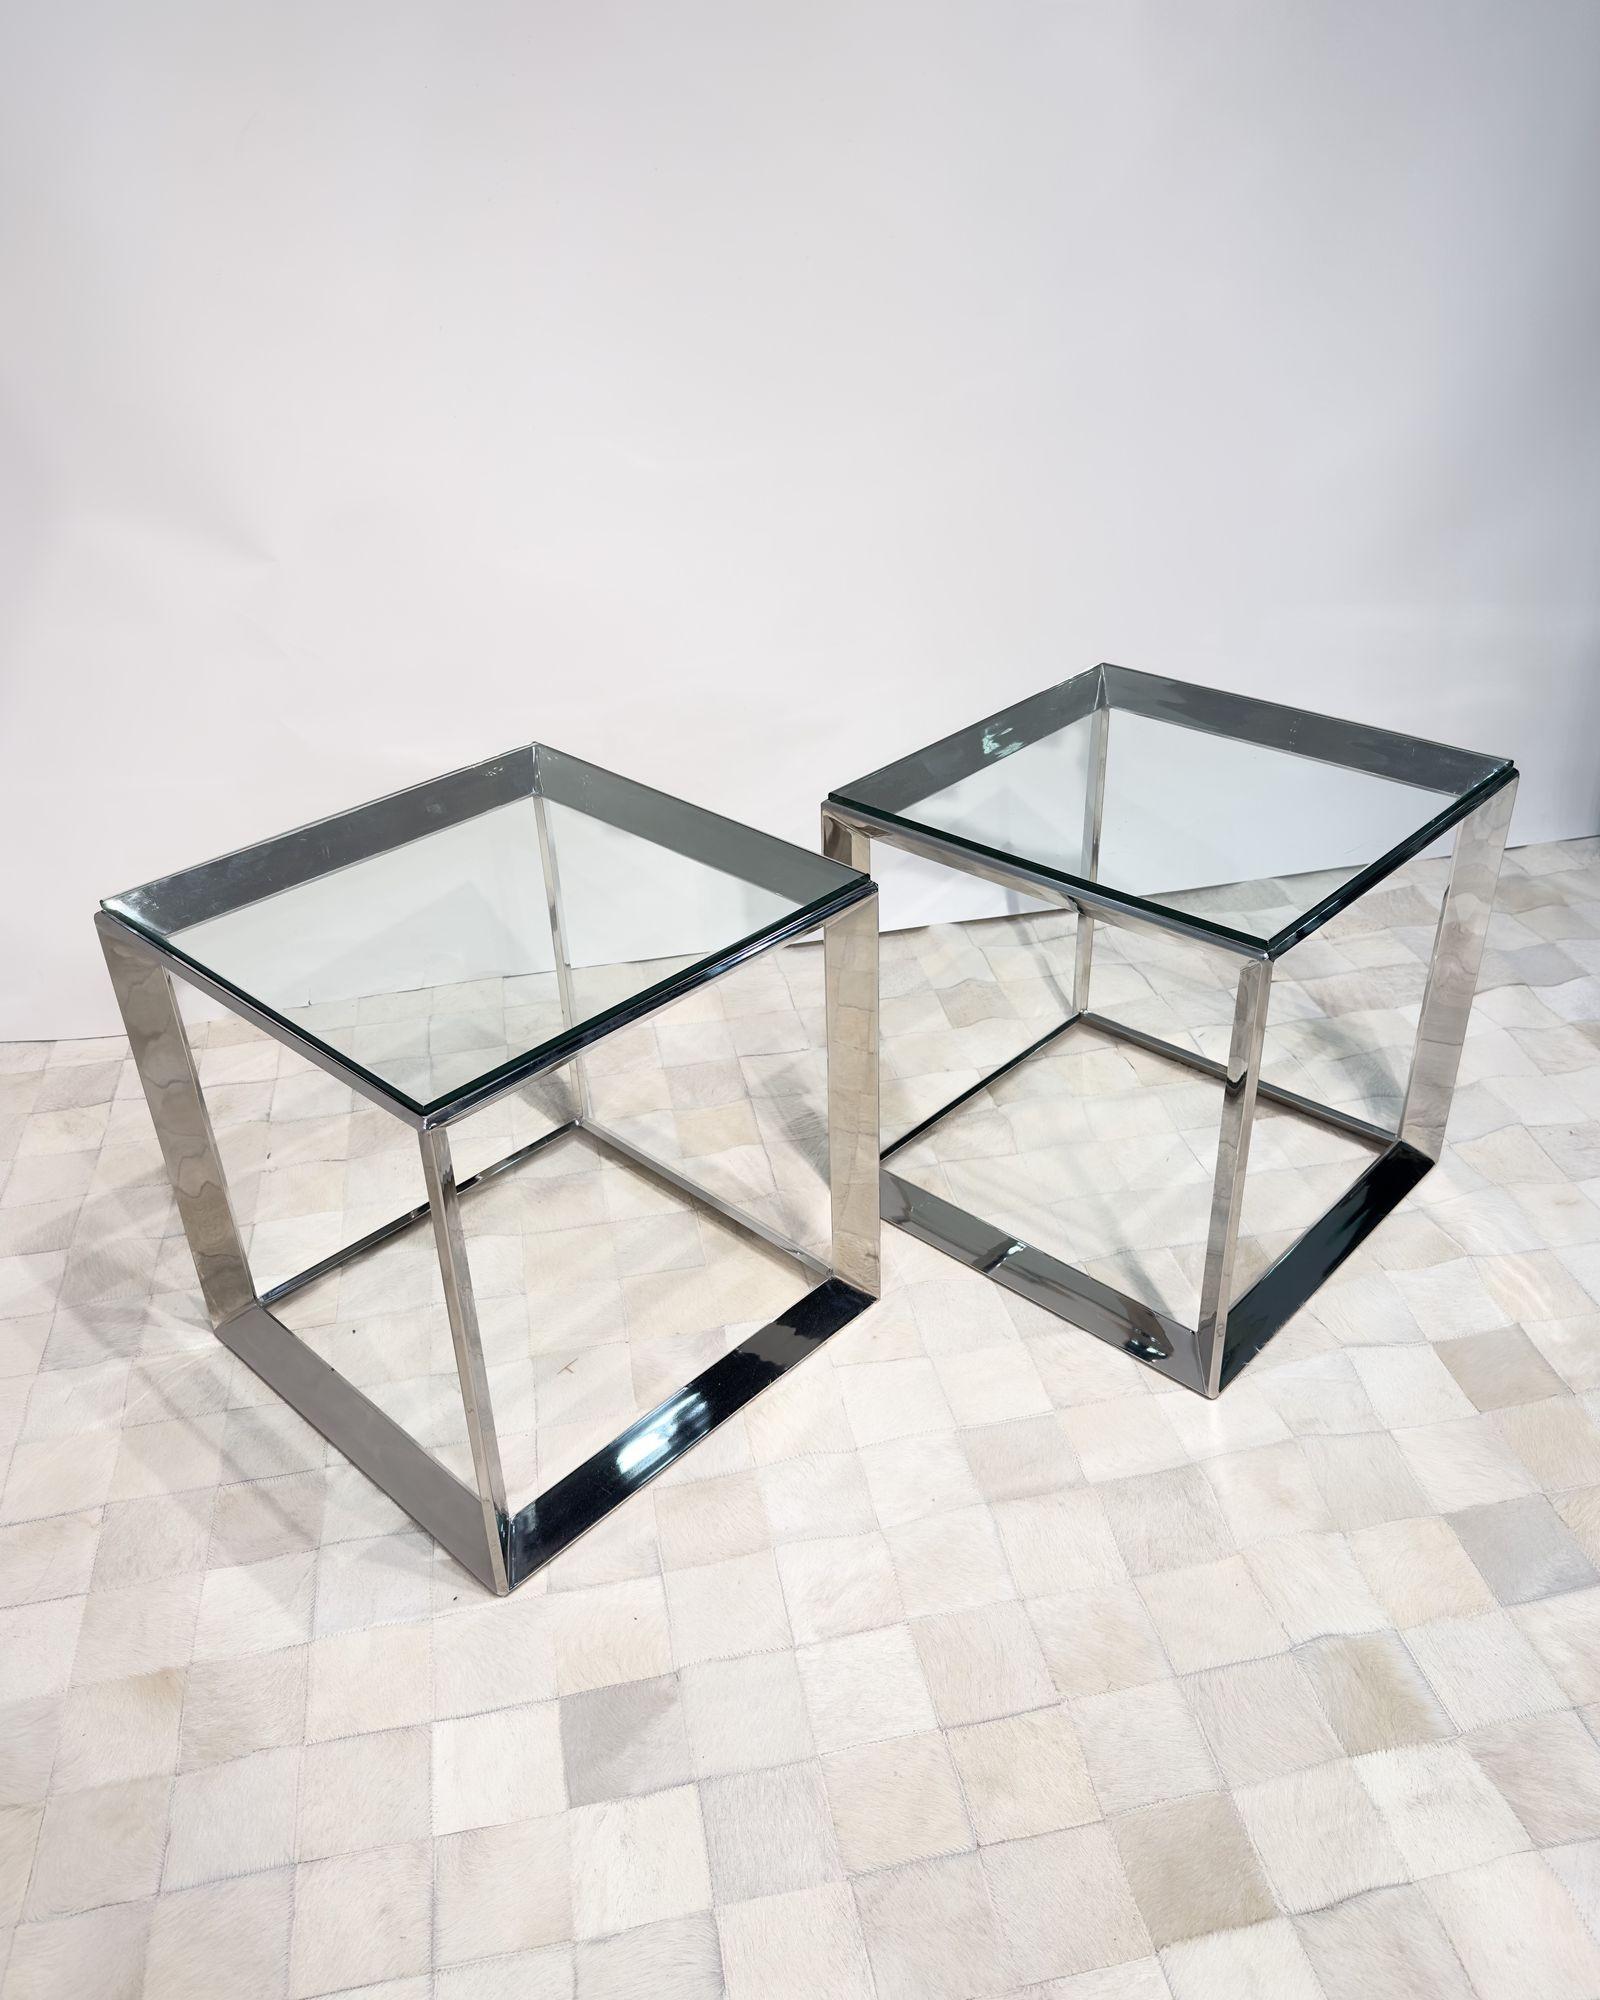 Pair Pace Chrome and Glass Side/End Tables, 1970. Original
Measure 19.5